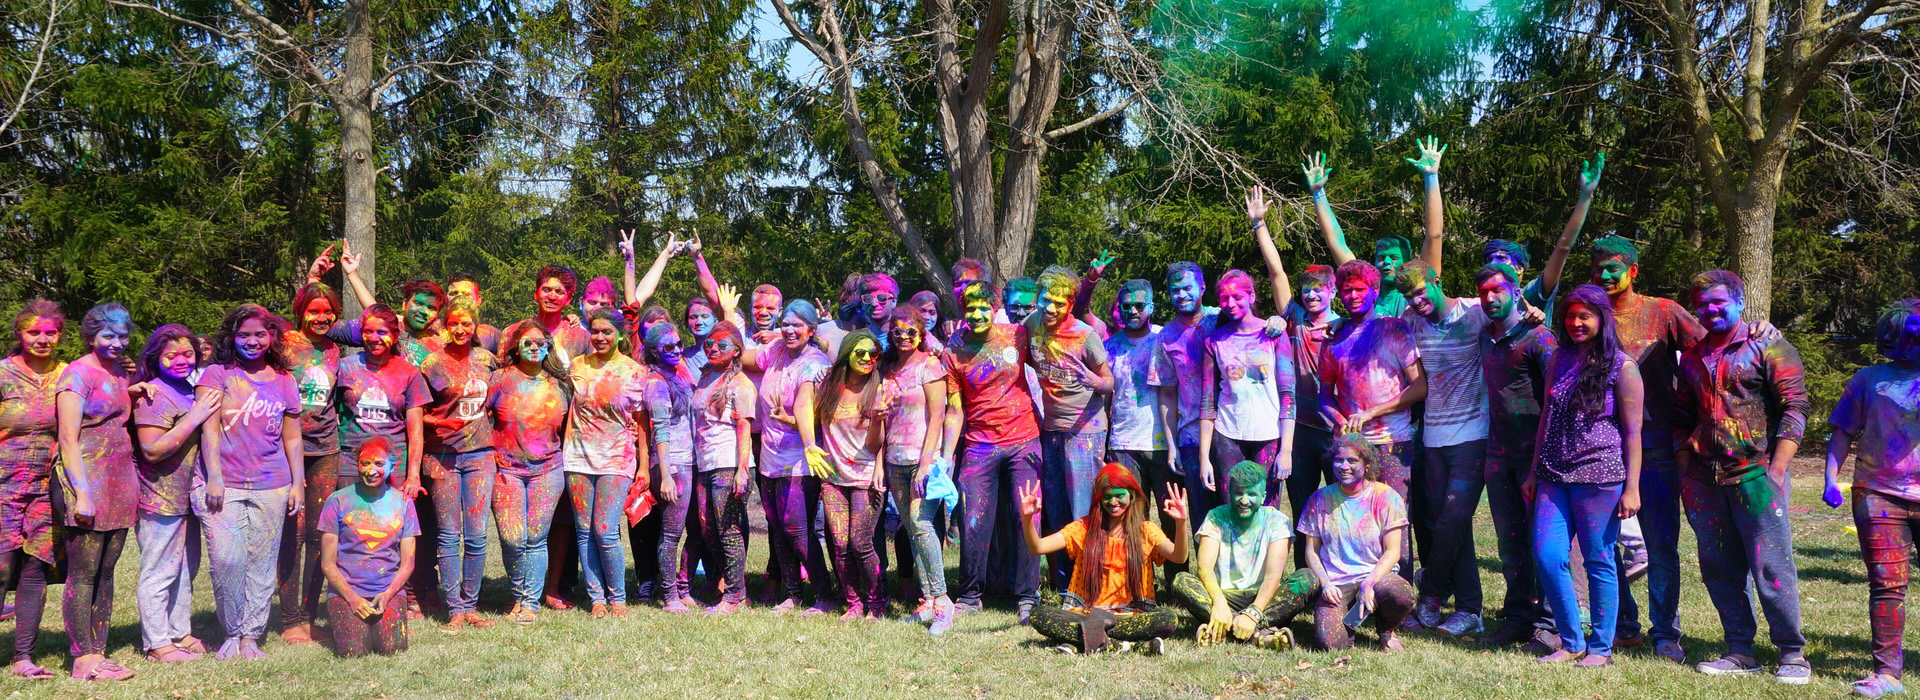 group photo of the students participating in Holi